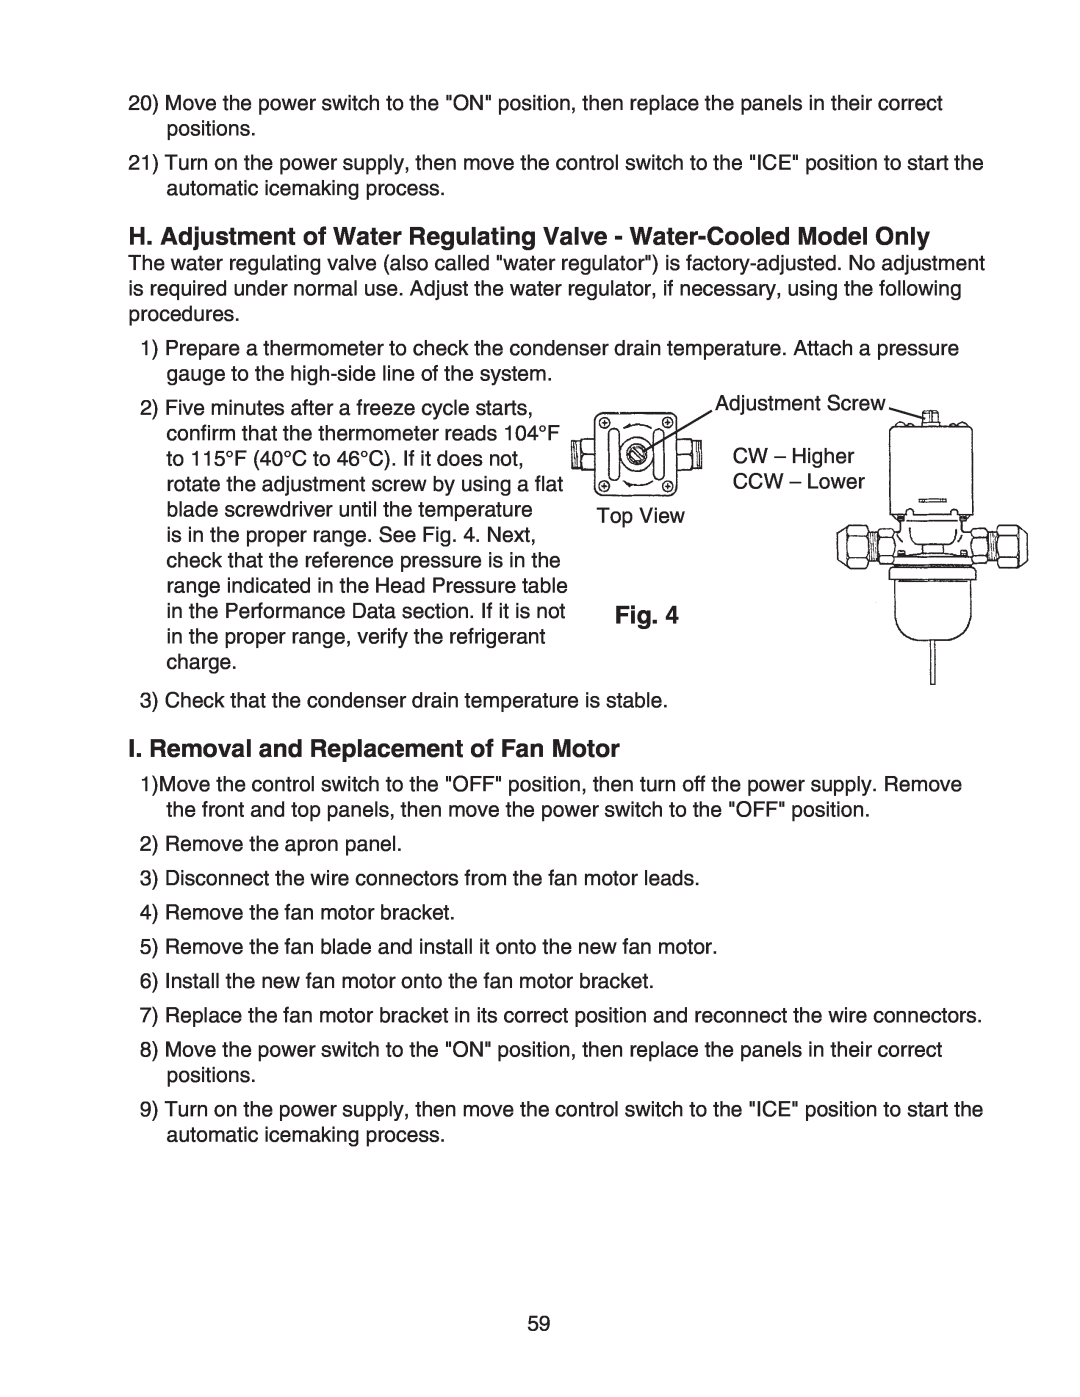 Hoshizaki DCM-500BWH-OS service manual H. Adjustment of Water Regulating Valve - Water-Cooled Model Only 